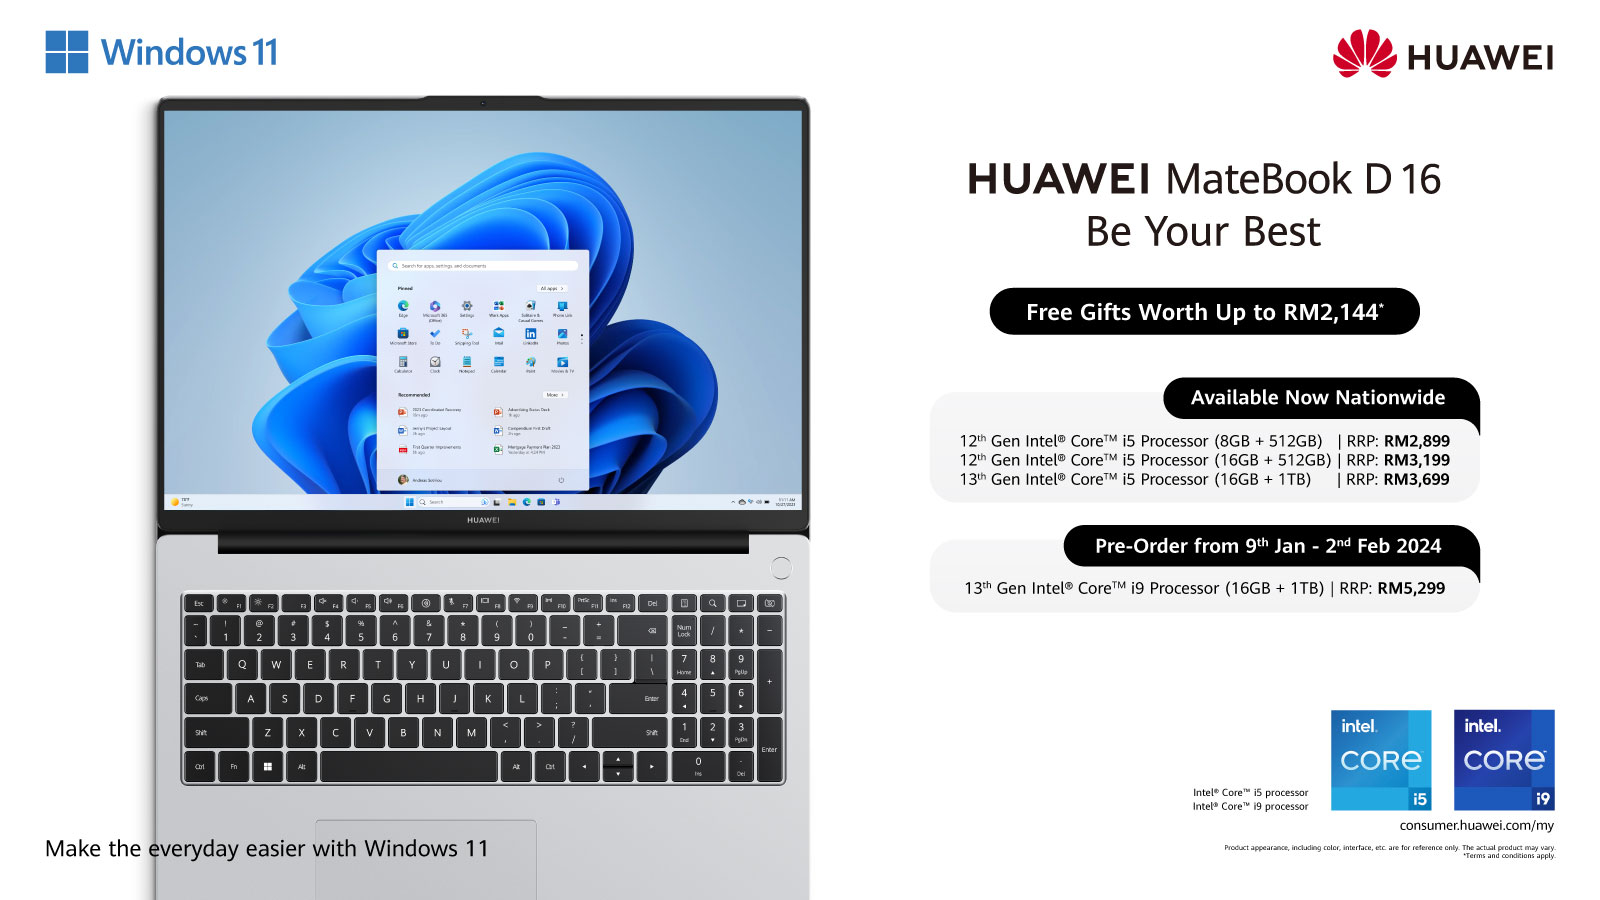 HUAWEI MateBook D 16 Is Now Available Nationwide Across All Stores And Online Platforms